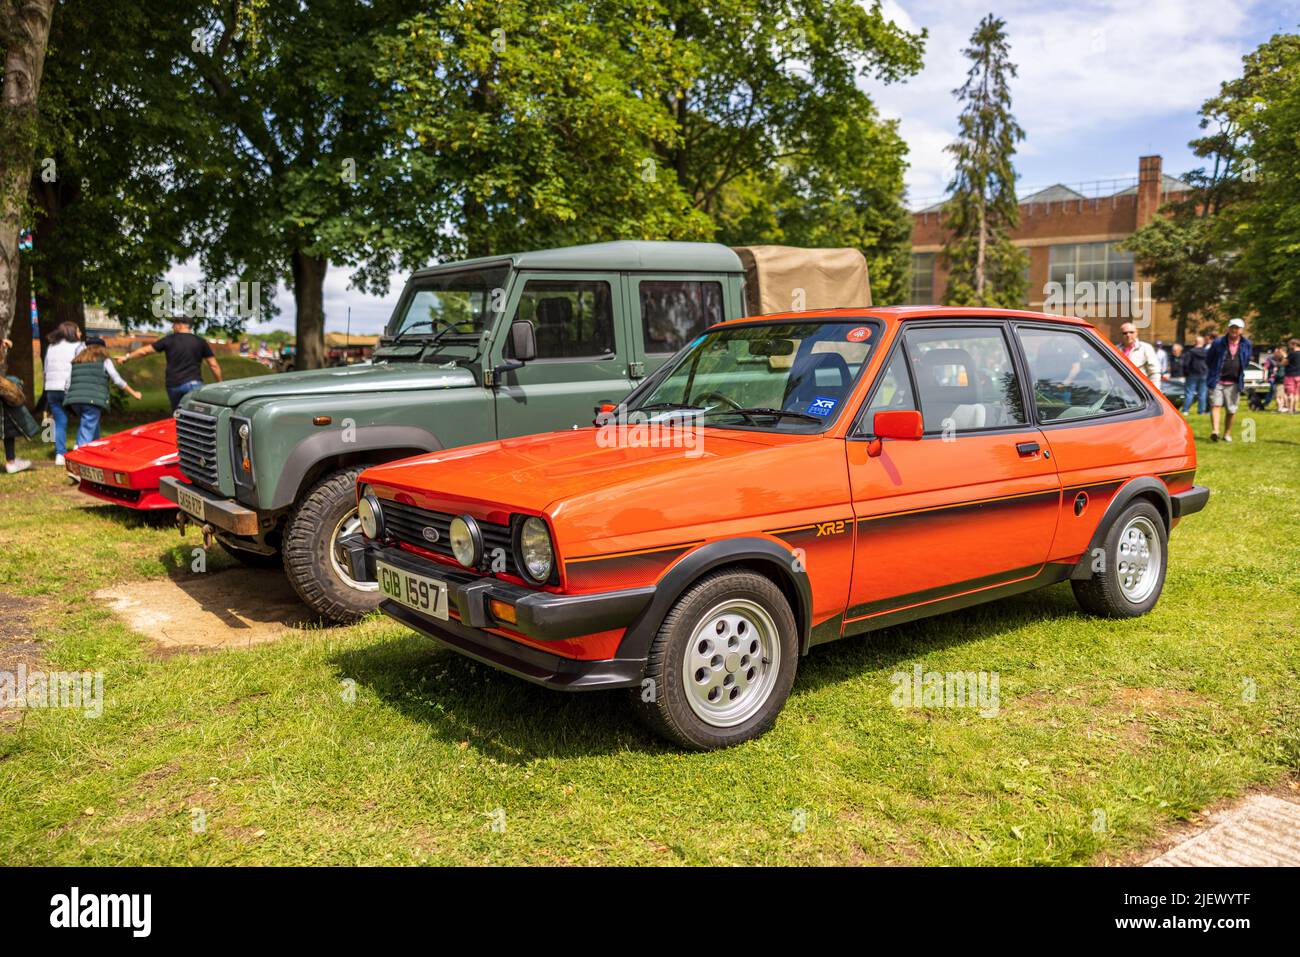 1982 Ford Fiesta XR2 ‘GIB 1597’ on display at the Bicester Scramble on the 19th June 2022 Stock Photo